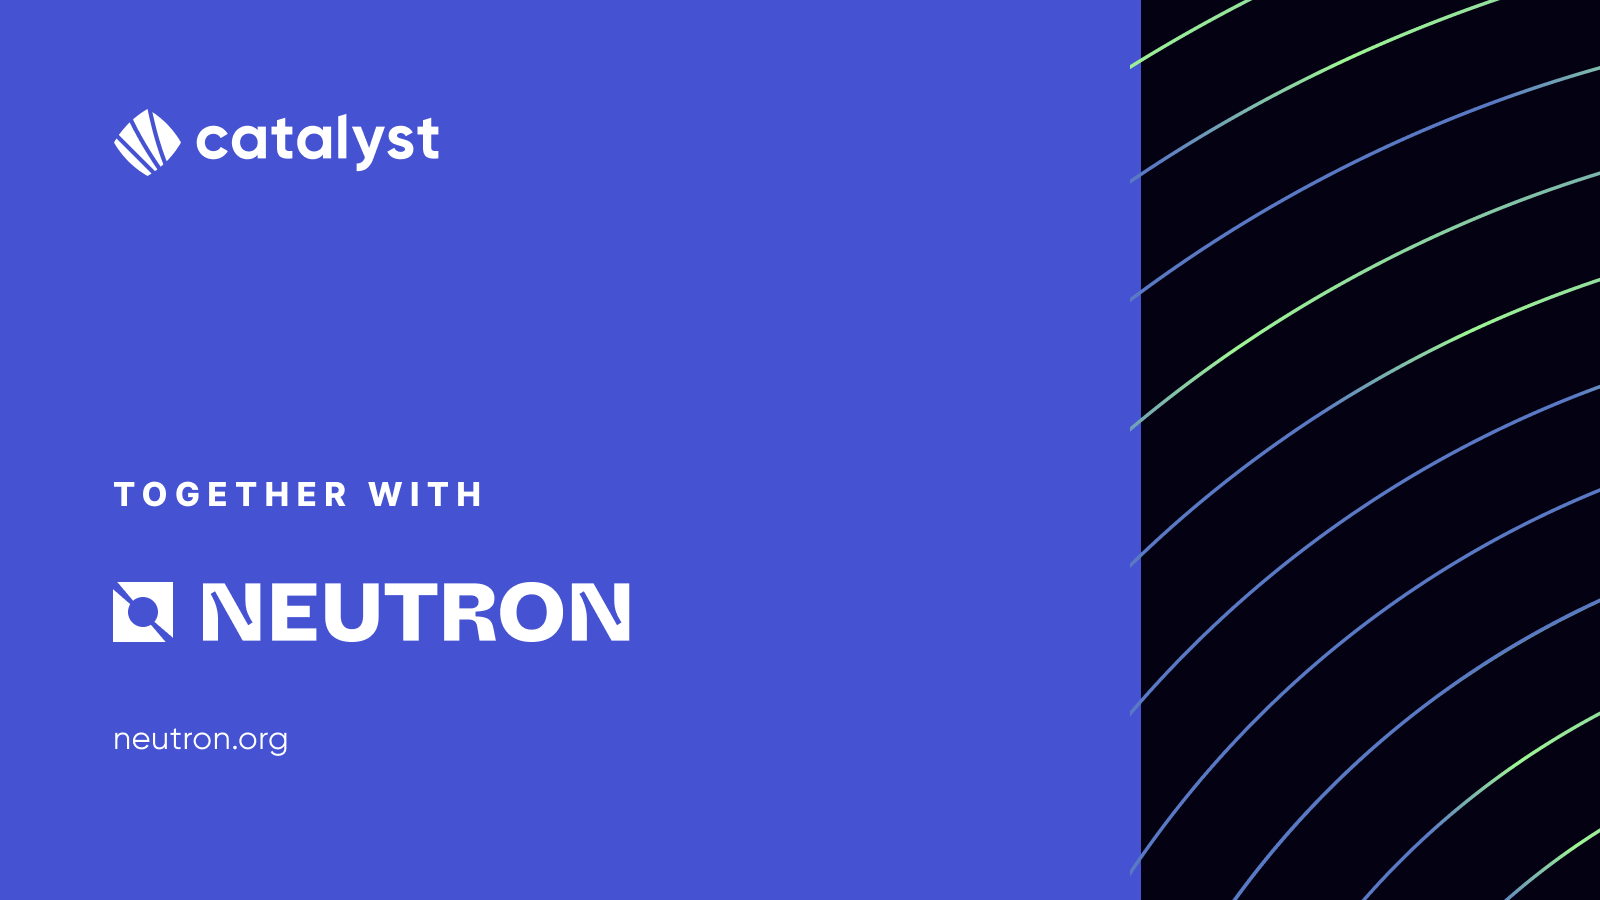 Catalyst Builds with Neutron to Bring Effortless Cross-Chain Swaps to the Cosmos Ecosystem